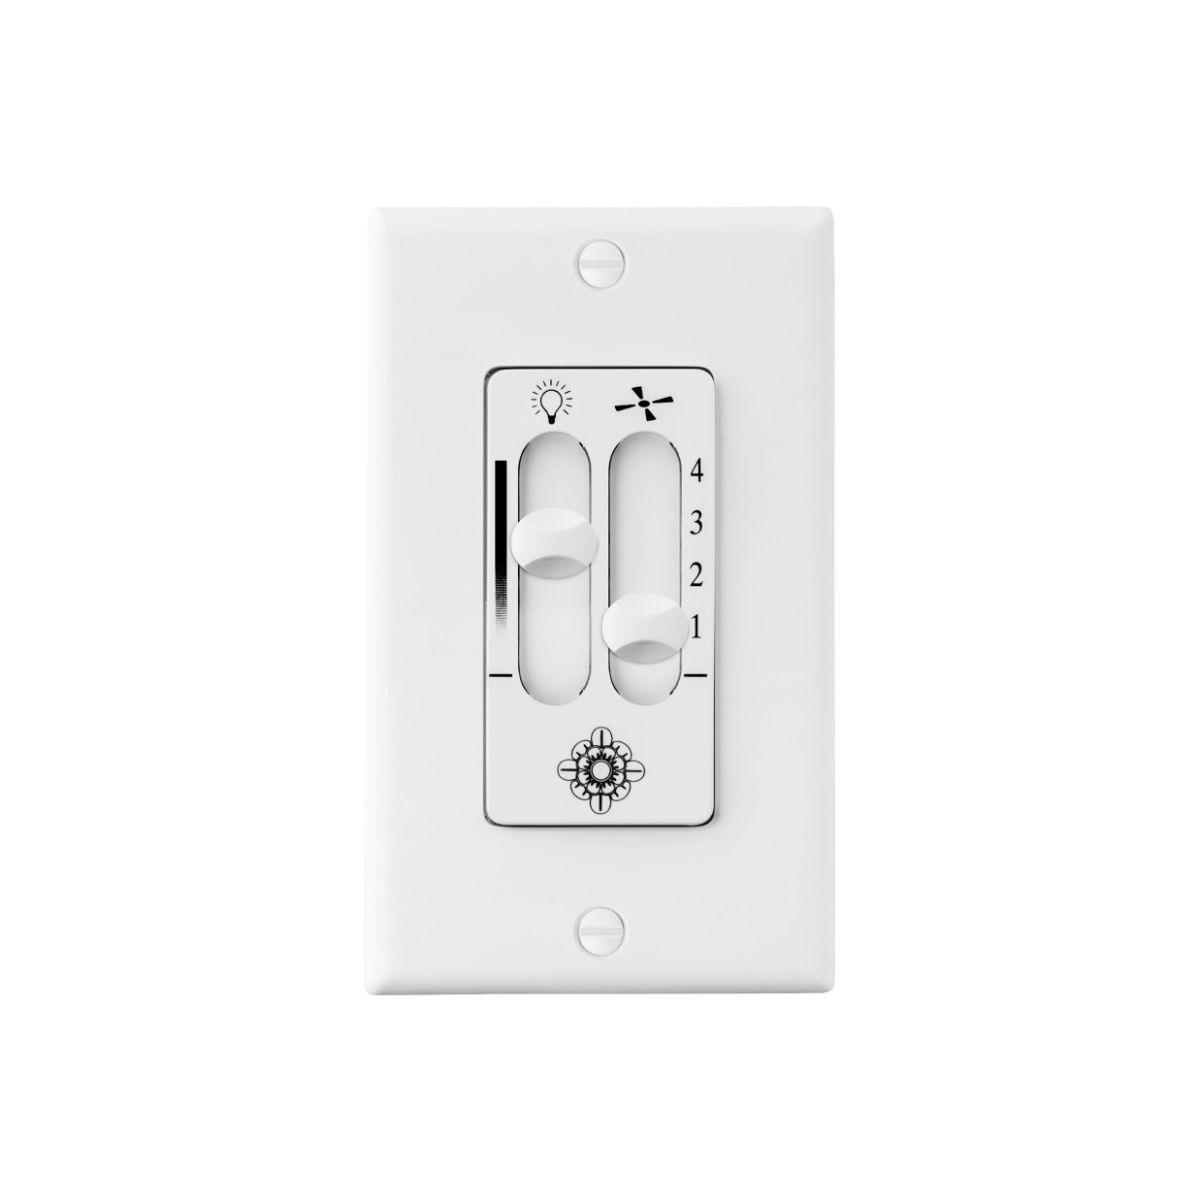 4-Speed Dimmer Ceiling Fan Wall Control, White Finish - Bees Lighting